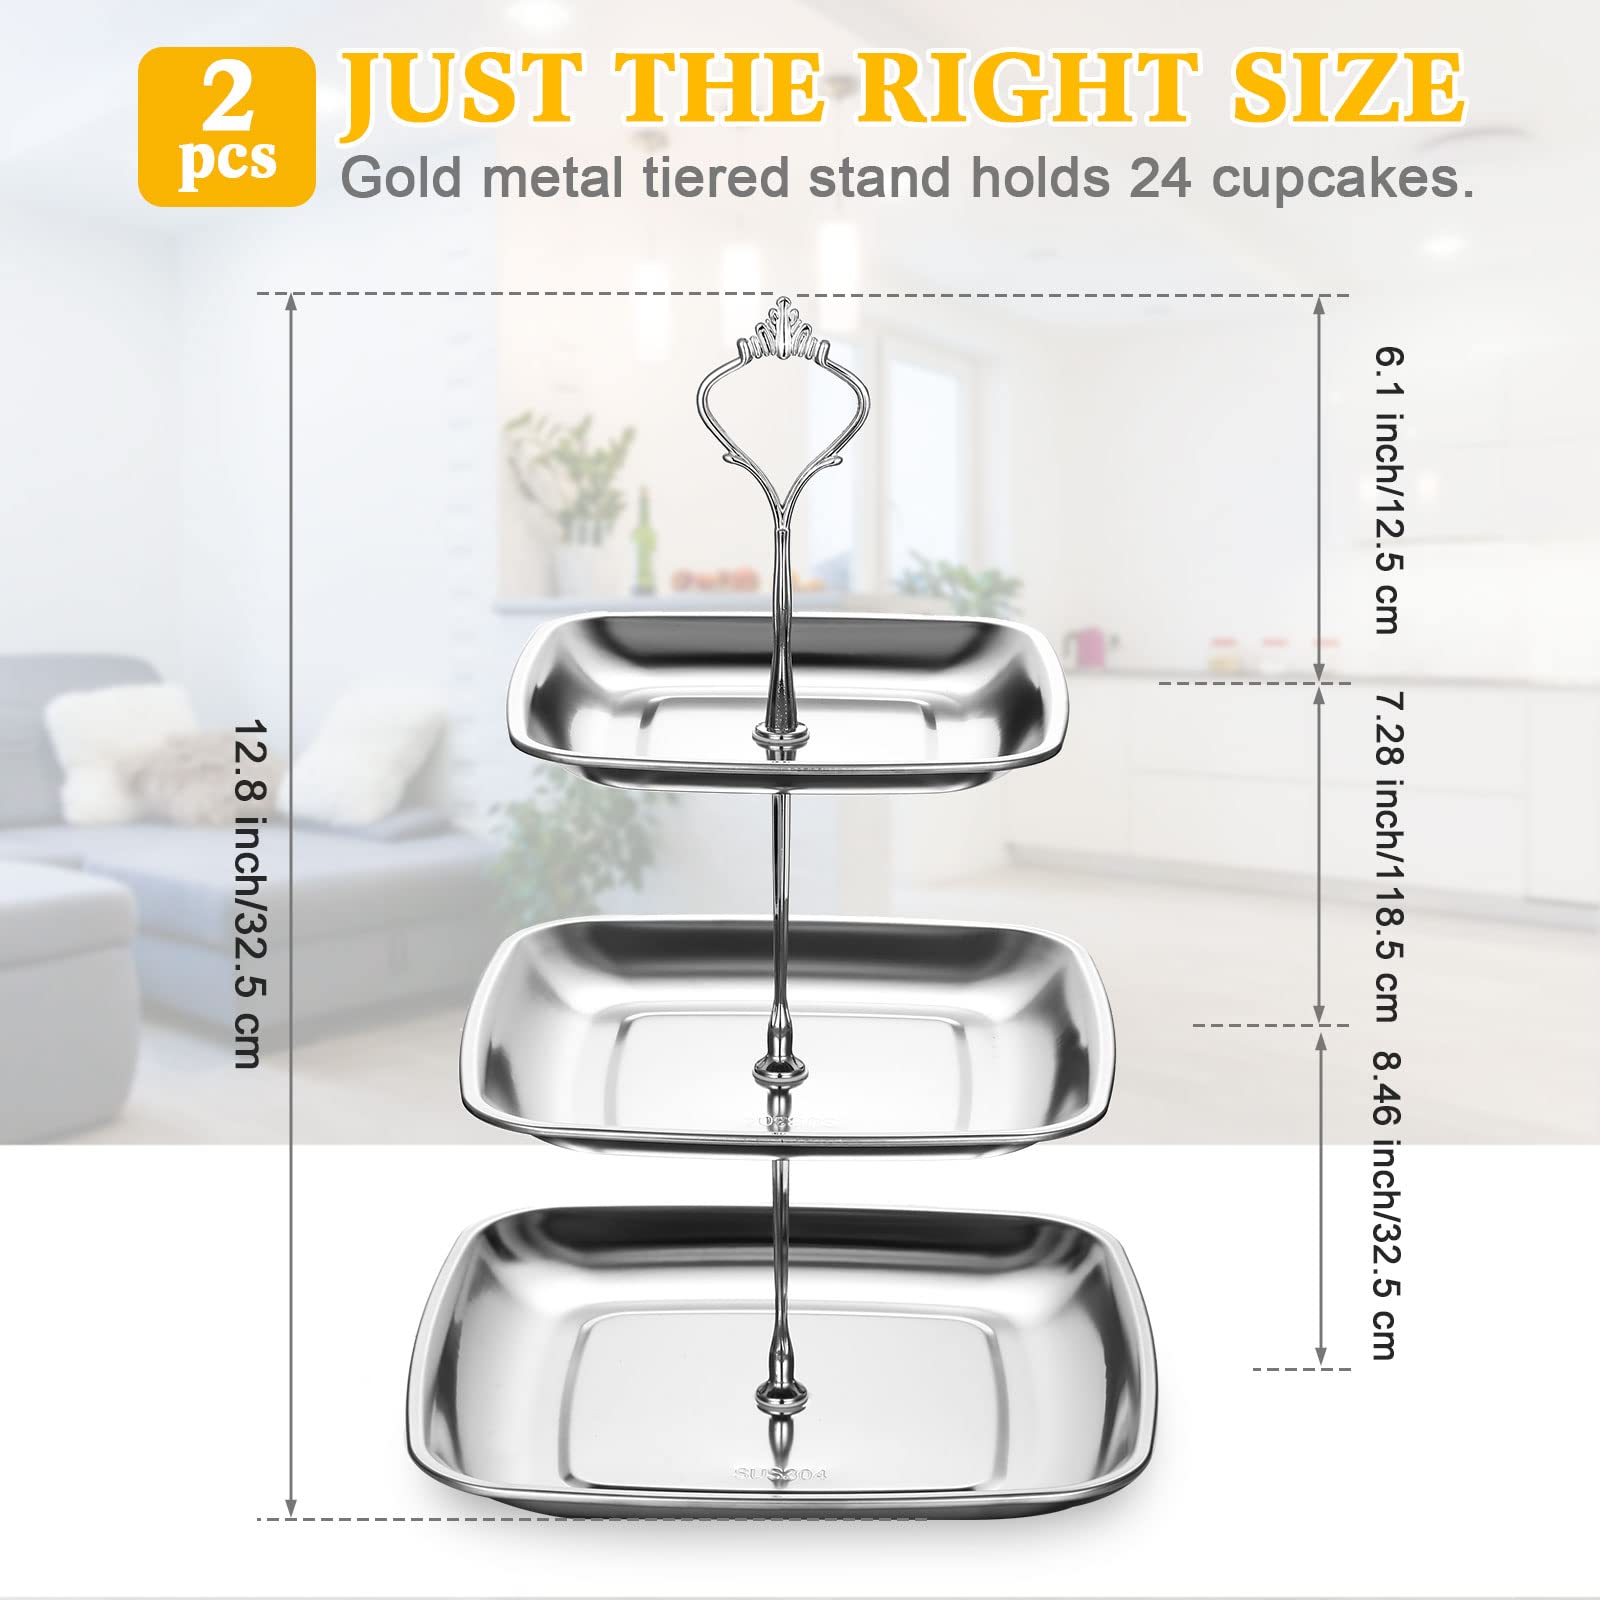 Gerrii 2 Pcs Metal 3 Tiered Cupcake Stand Cake Stand Pastry Stand 3 Tiered Stainless Steel Cup Cake Dessert Stand Serving Tray for Wedding Birthday Party (Silver)